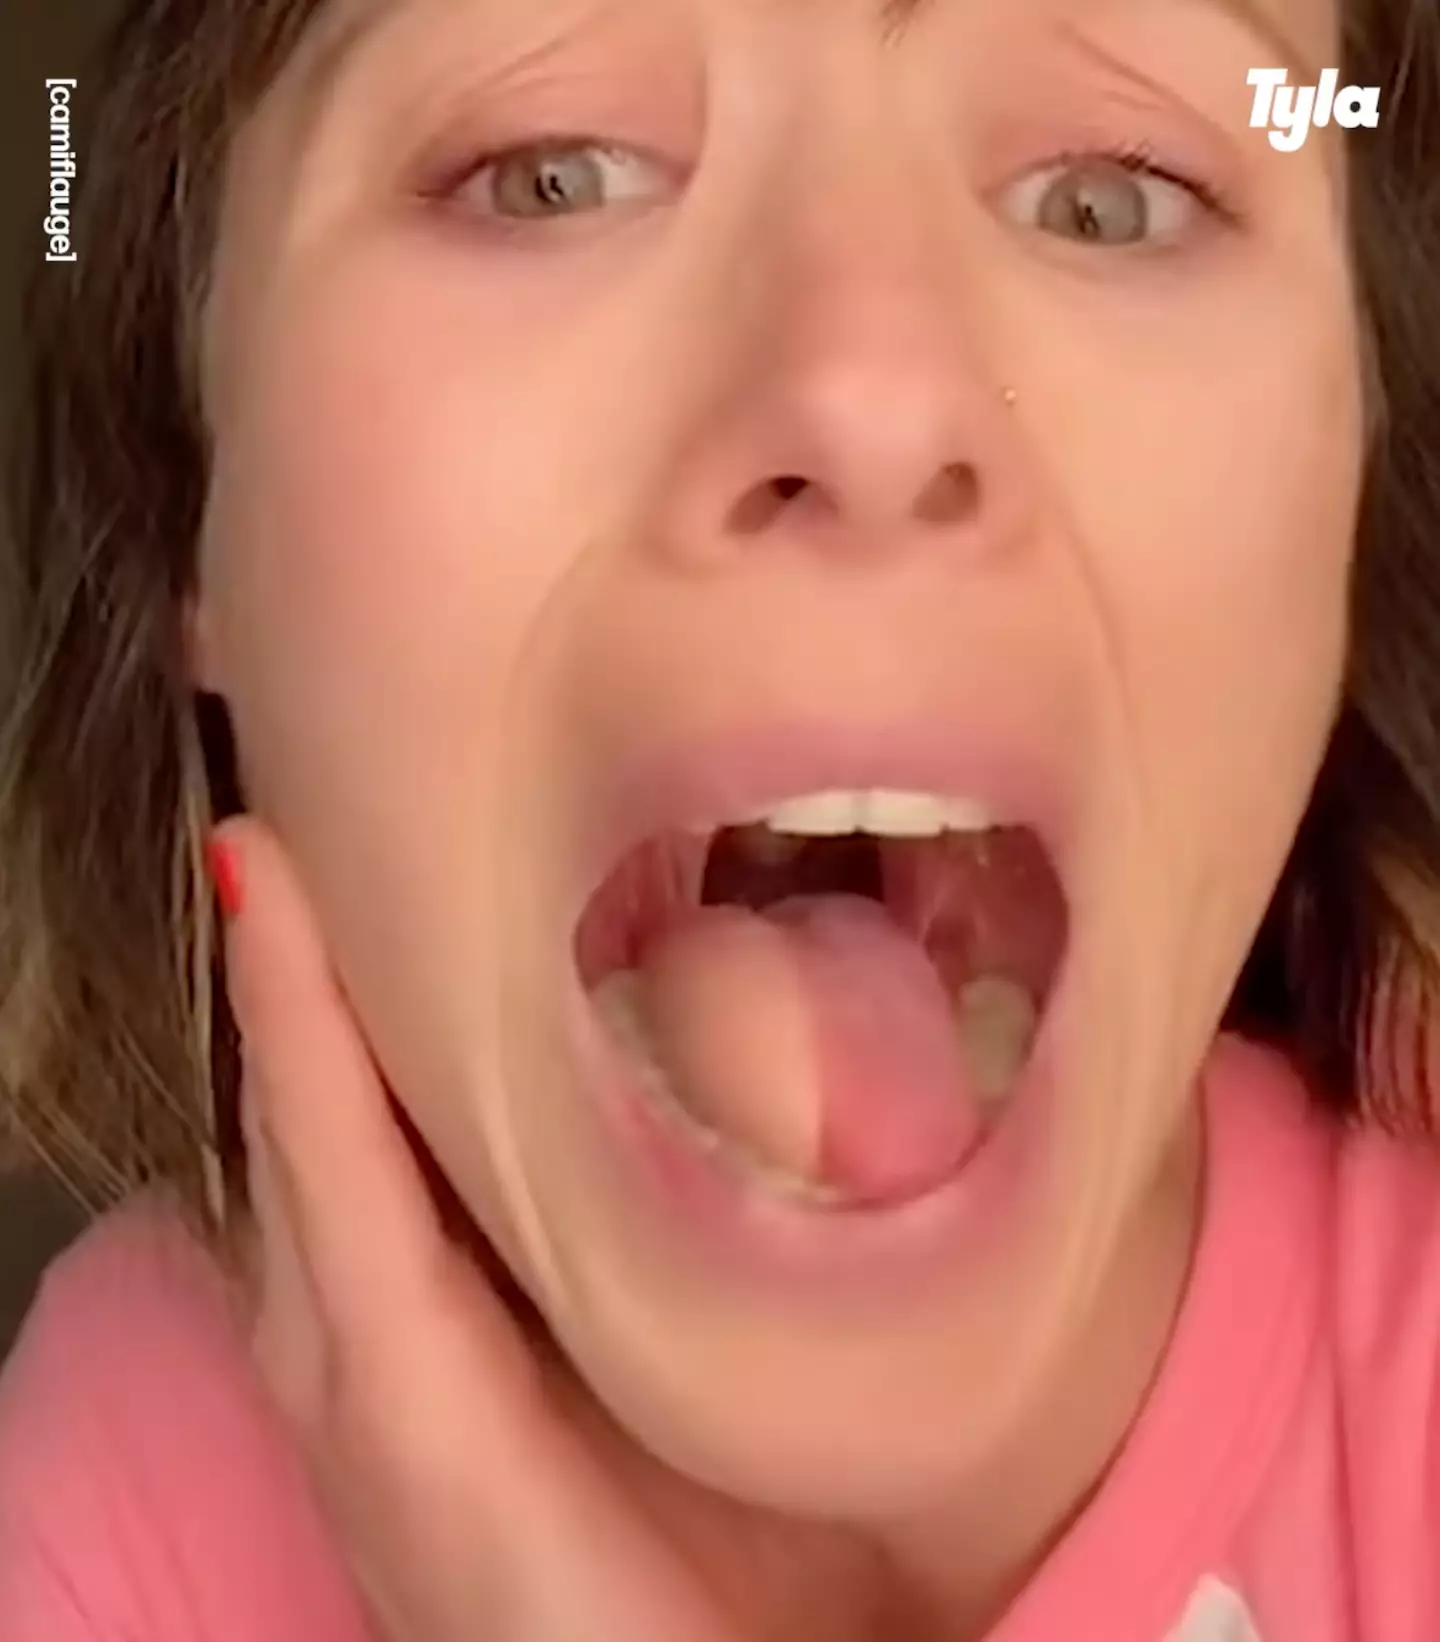 Cameron discussed her tongue surgery.